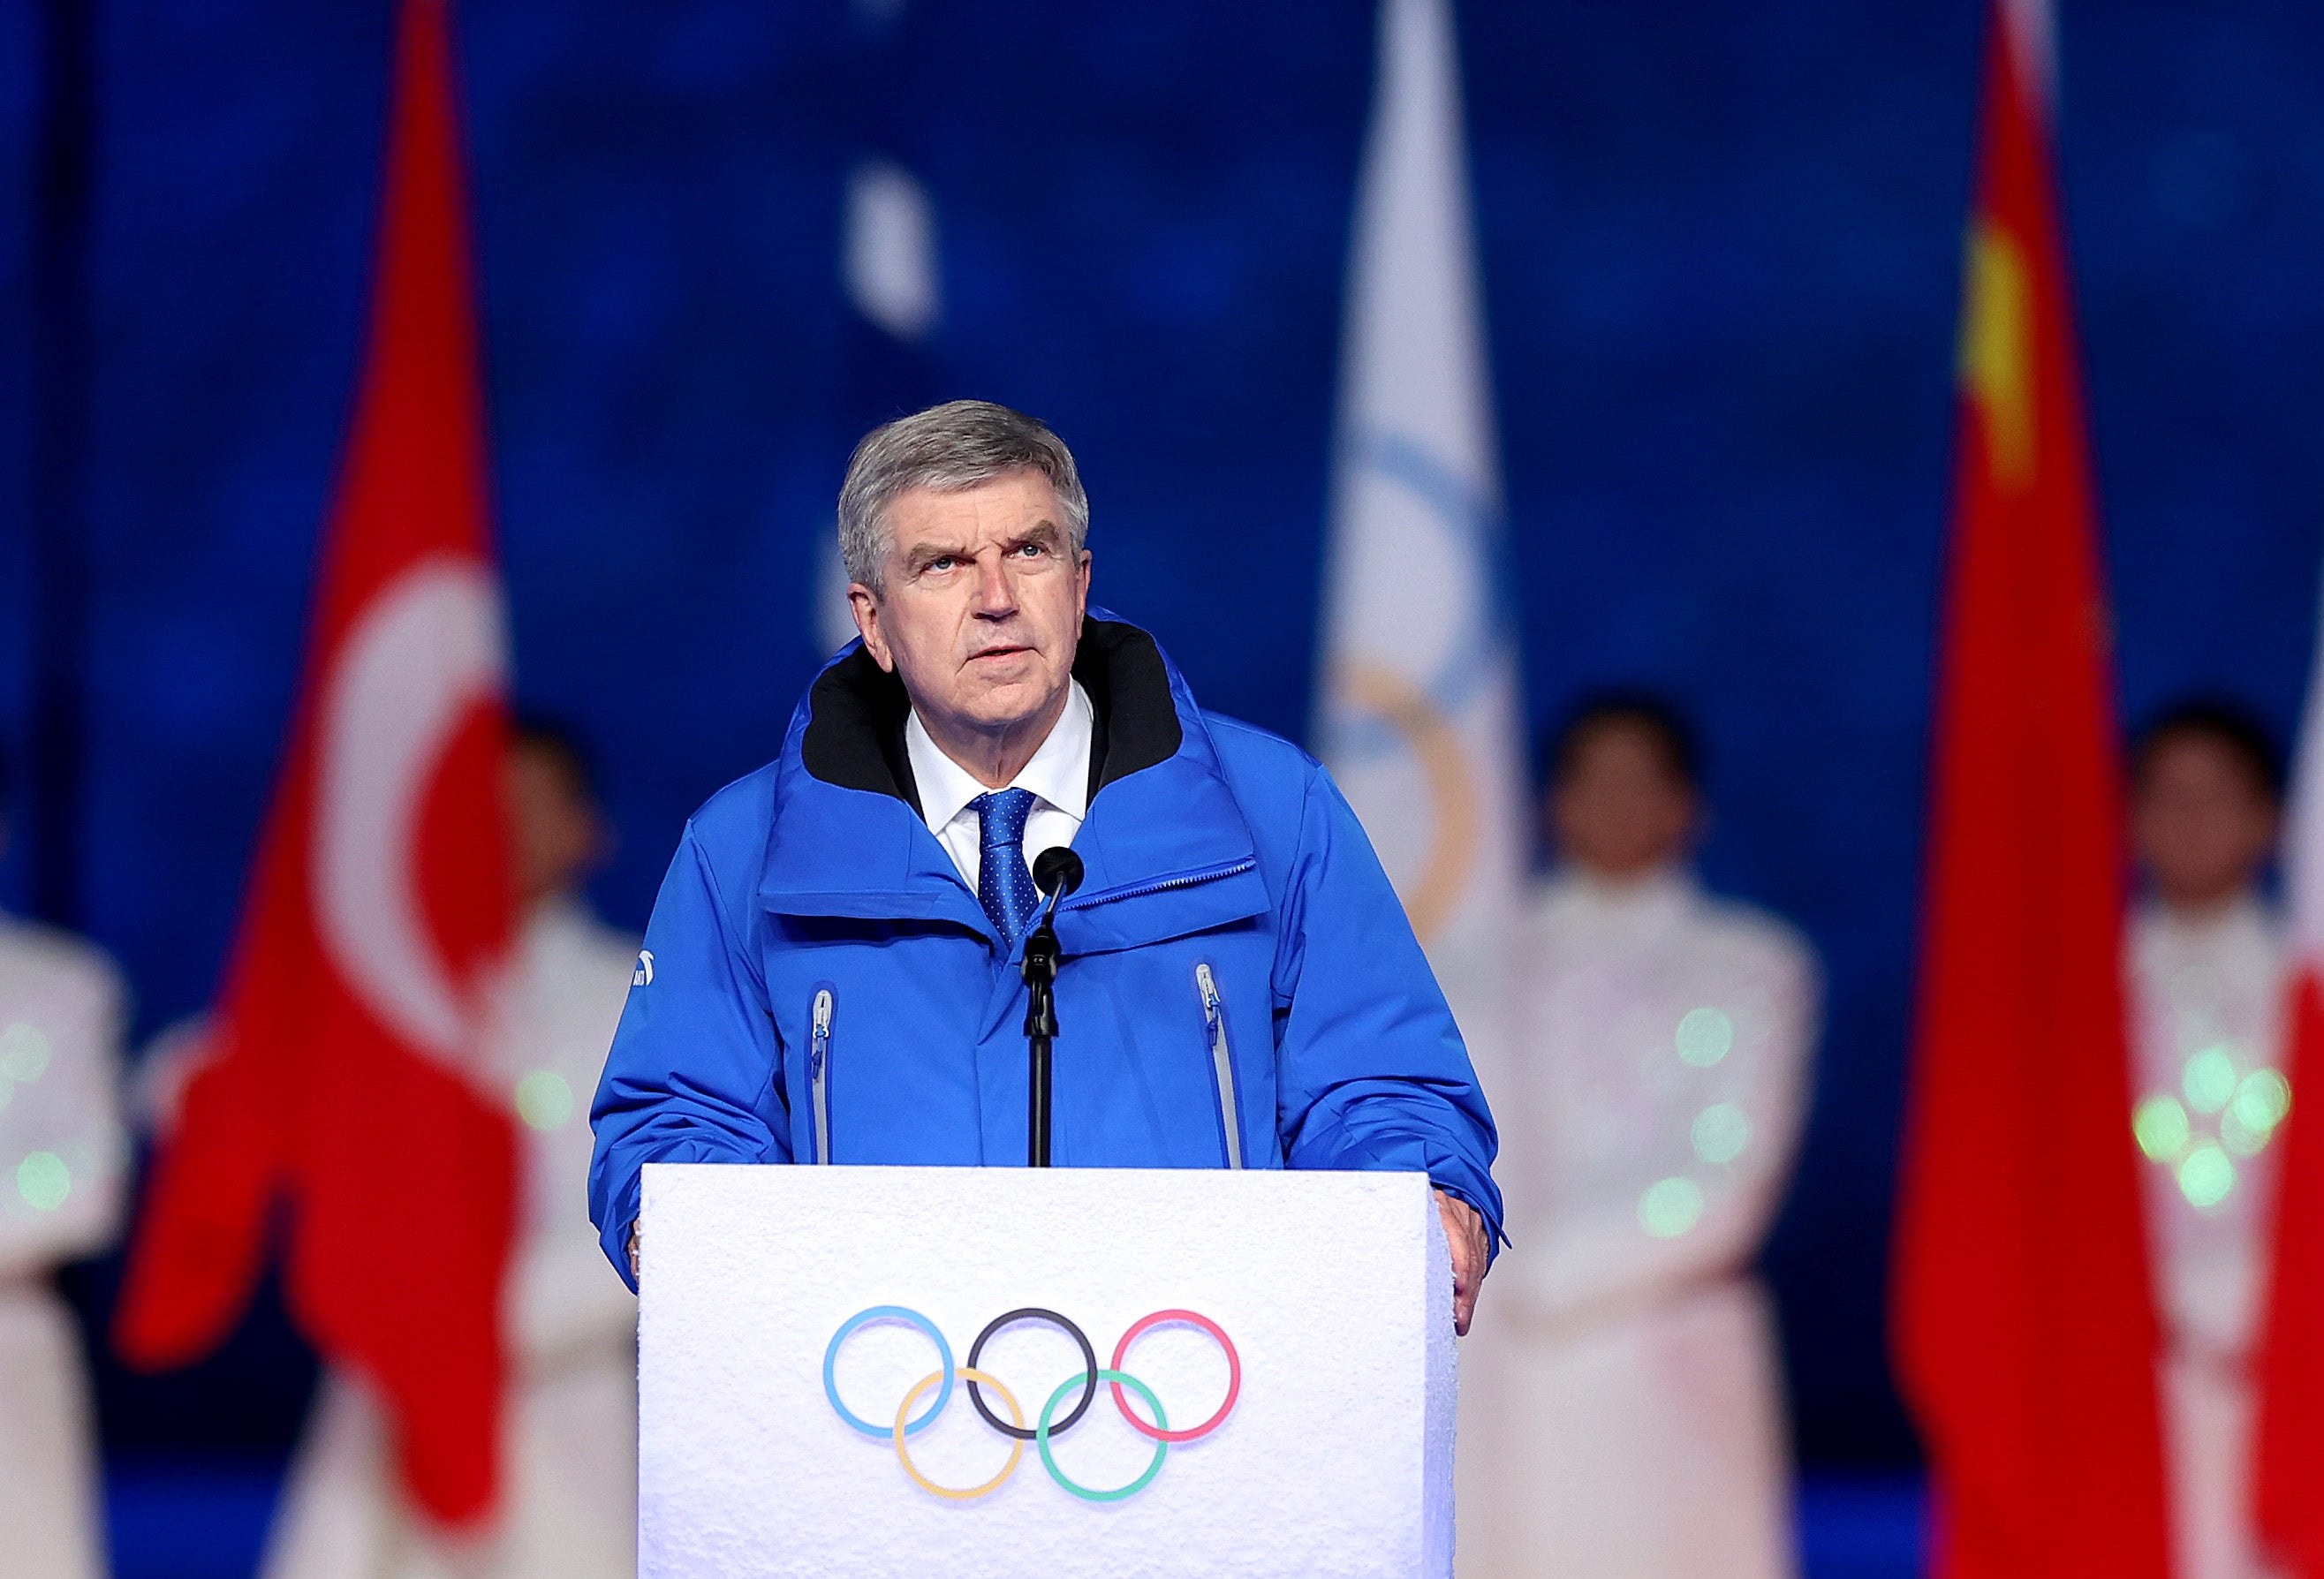 Thomas Bach has been criticised for not speaking out on human rights abuses